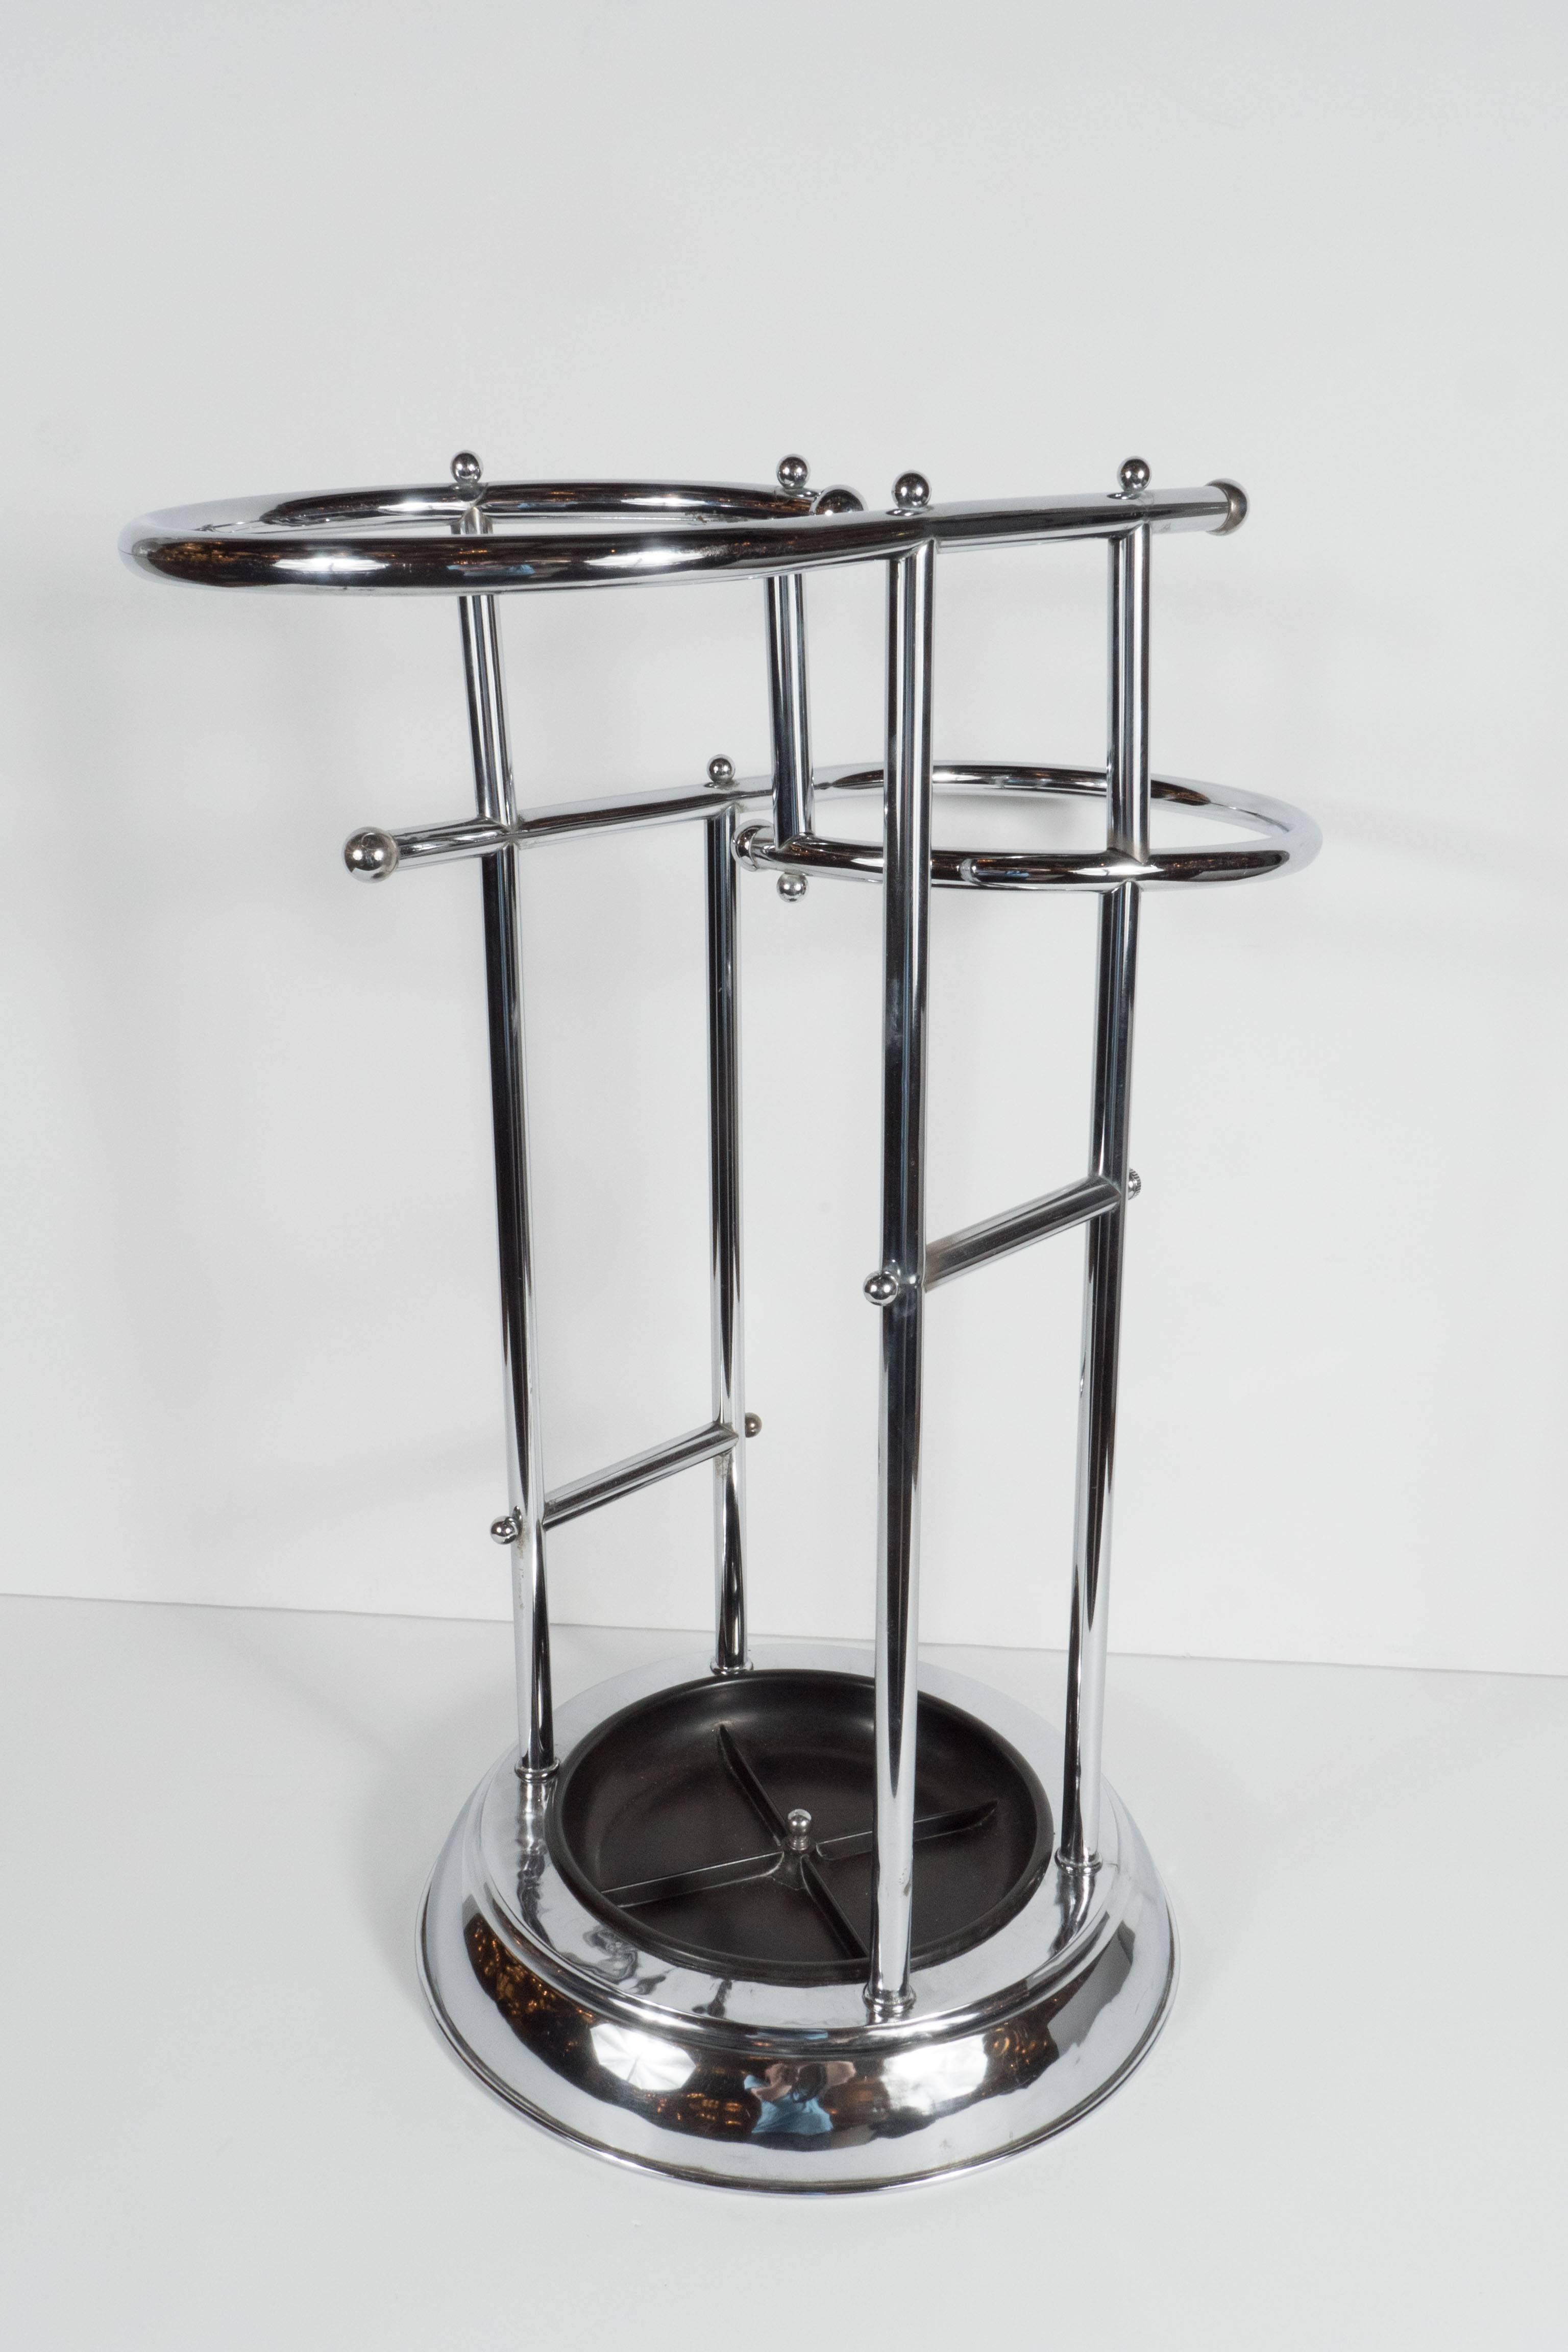 This Machine Age Art Deco umbrella stand features a stylized Bauhaus inspired design in chrome. It features a circular base with an inset bakelite center to catch dripping from wet umbrellas. The chromed tubular two tiers are designed for taller and